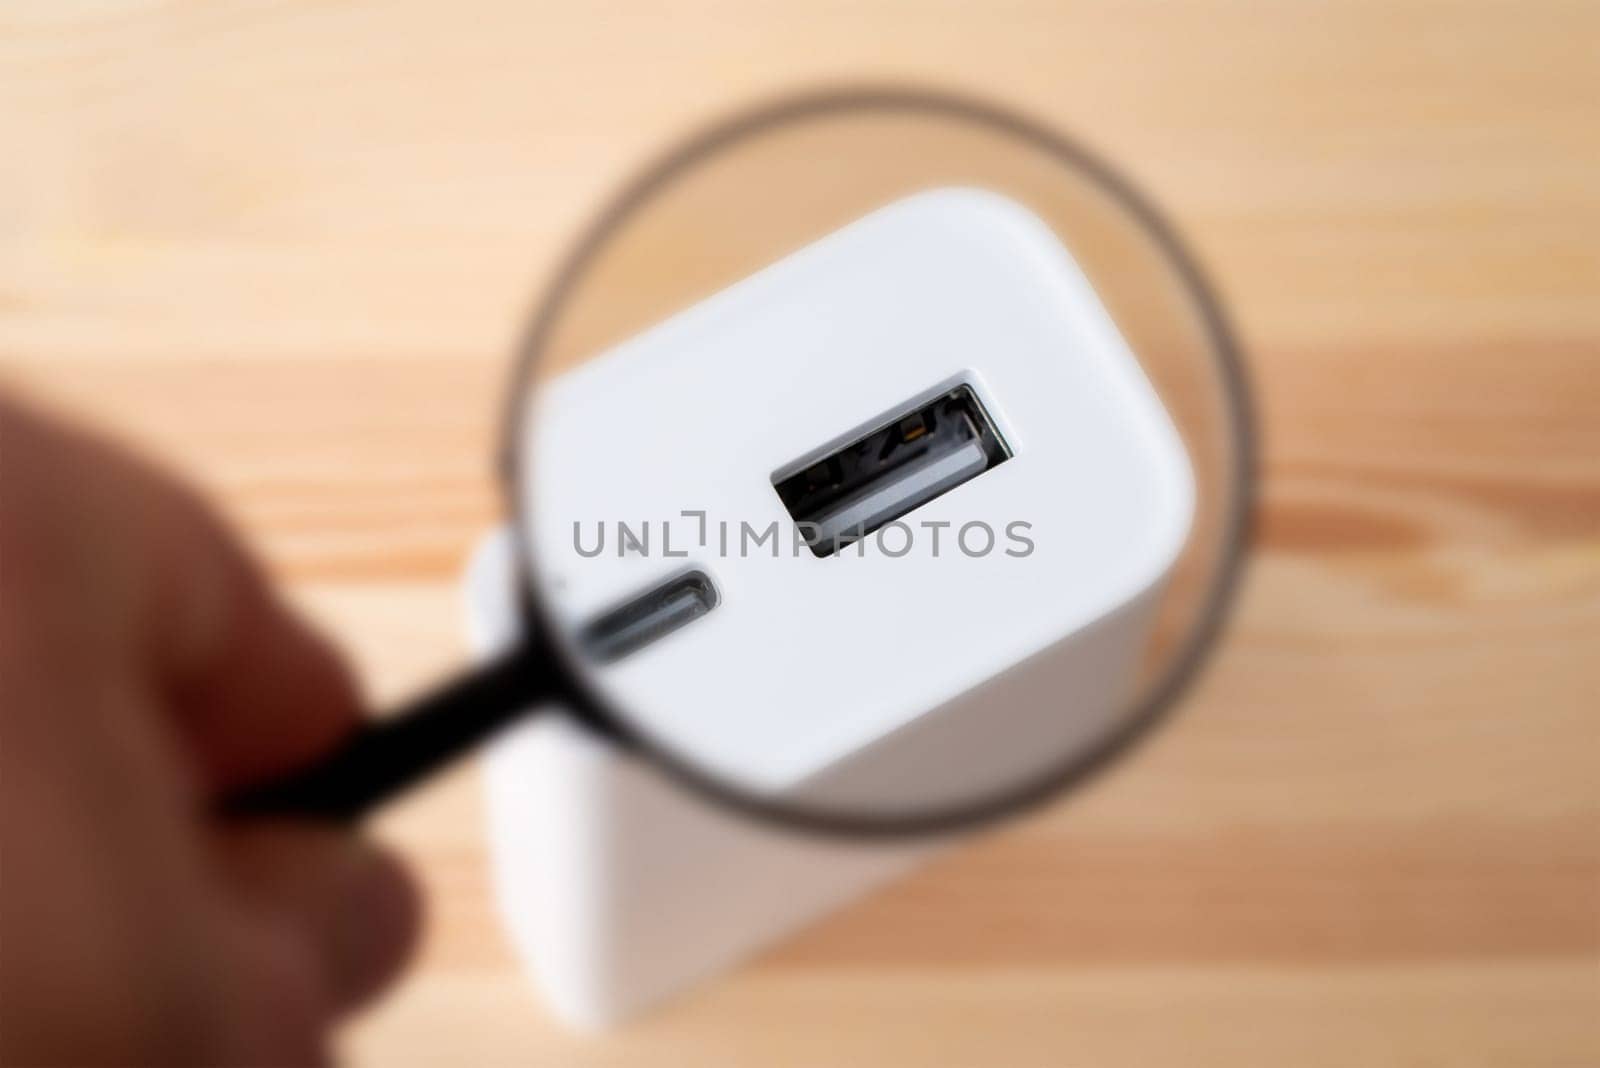 Magnifying glass on USB A port of power bank by VitaliiPetrushenko